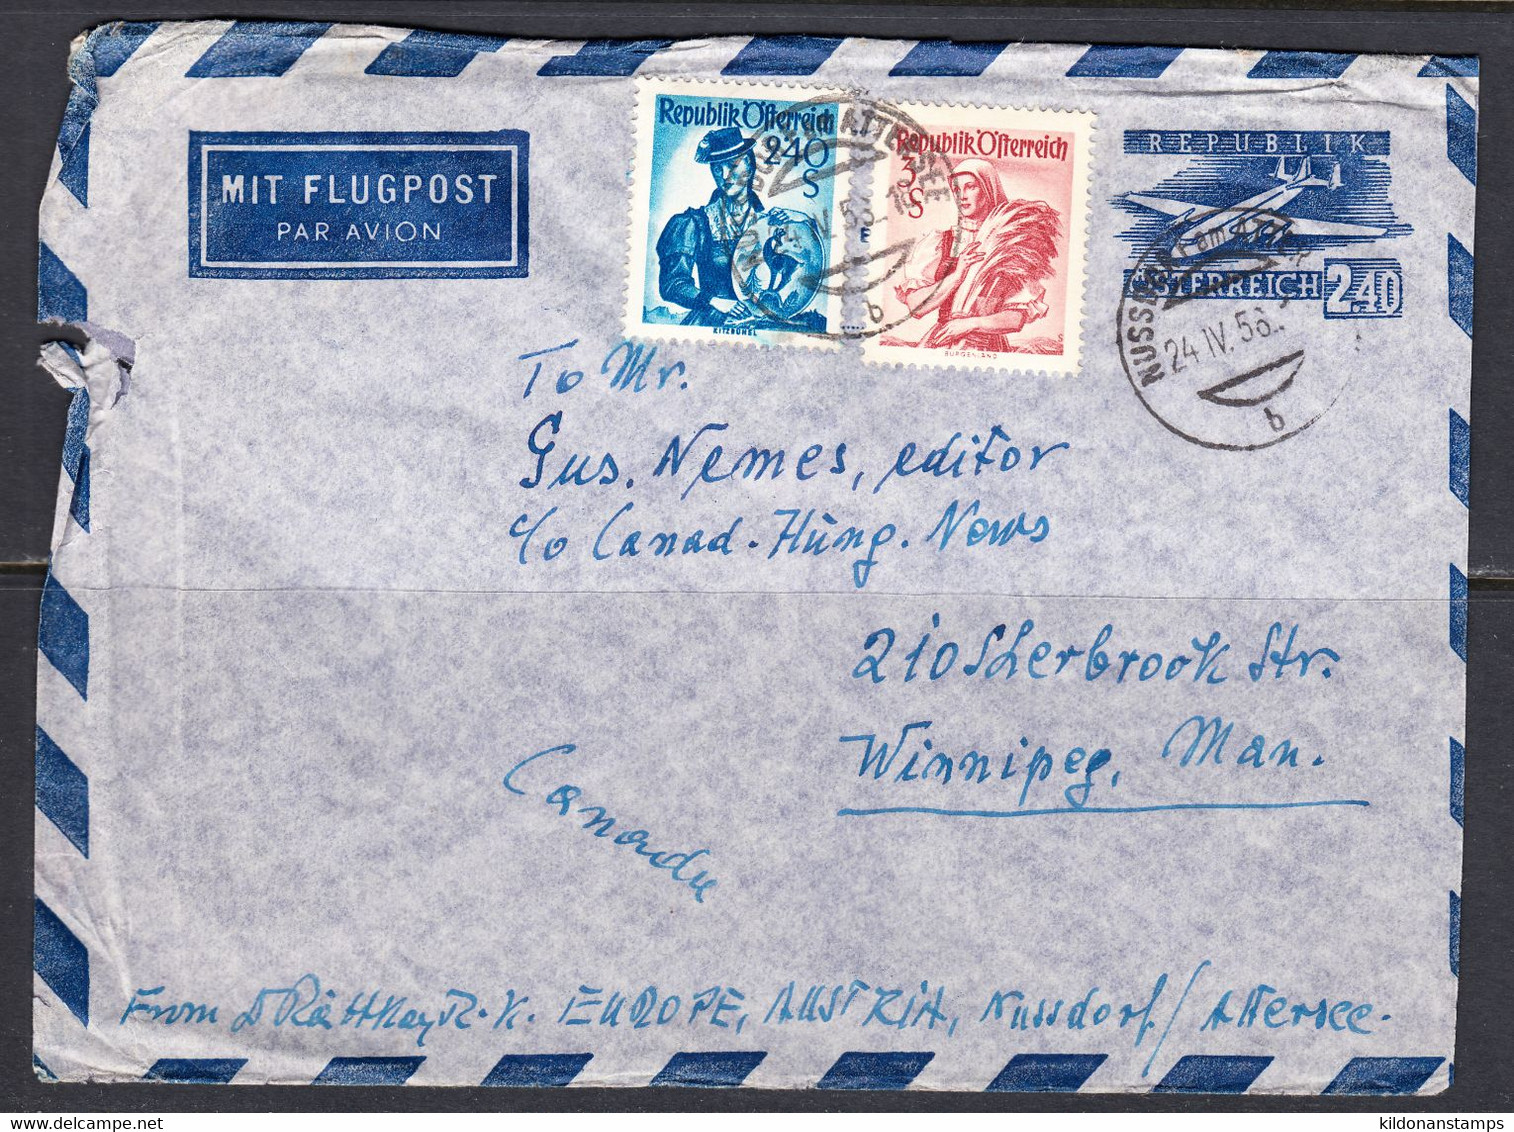 Austria Cover To Canadian Hungarian News, Air Mail, Postmark Apr 24, 1958 - Covers & Documents